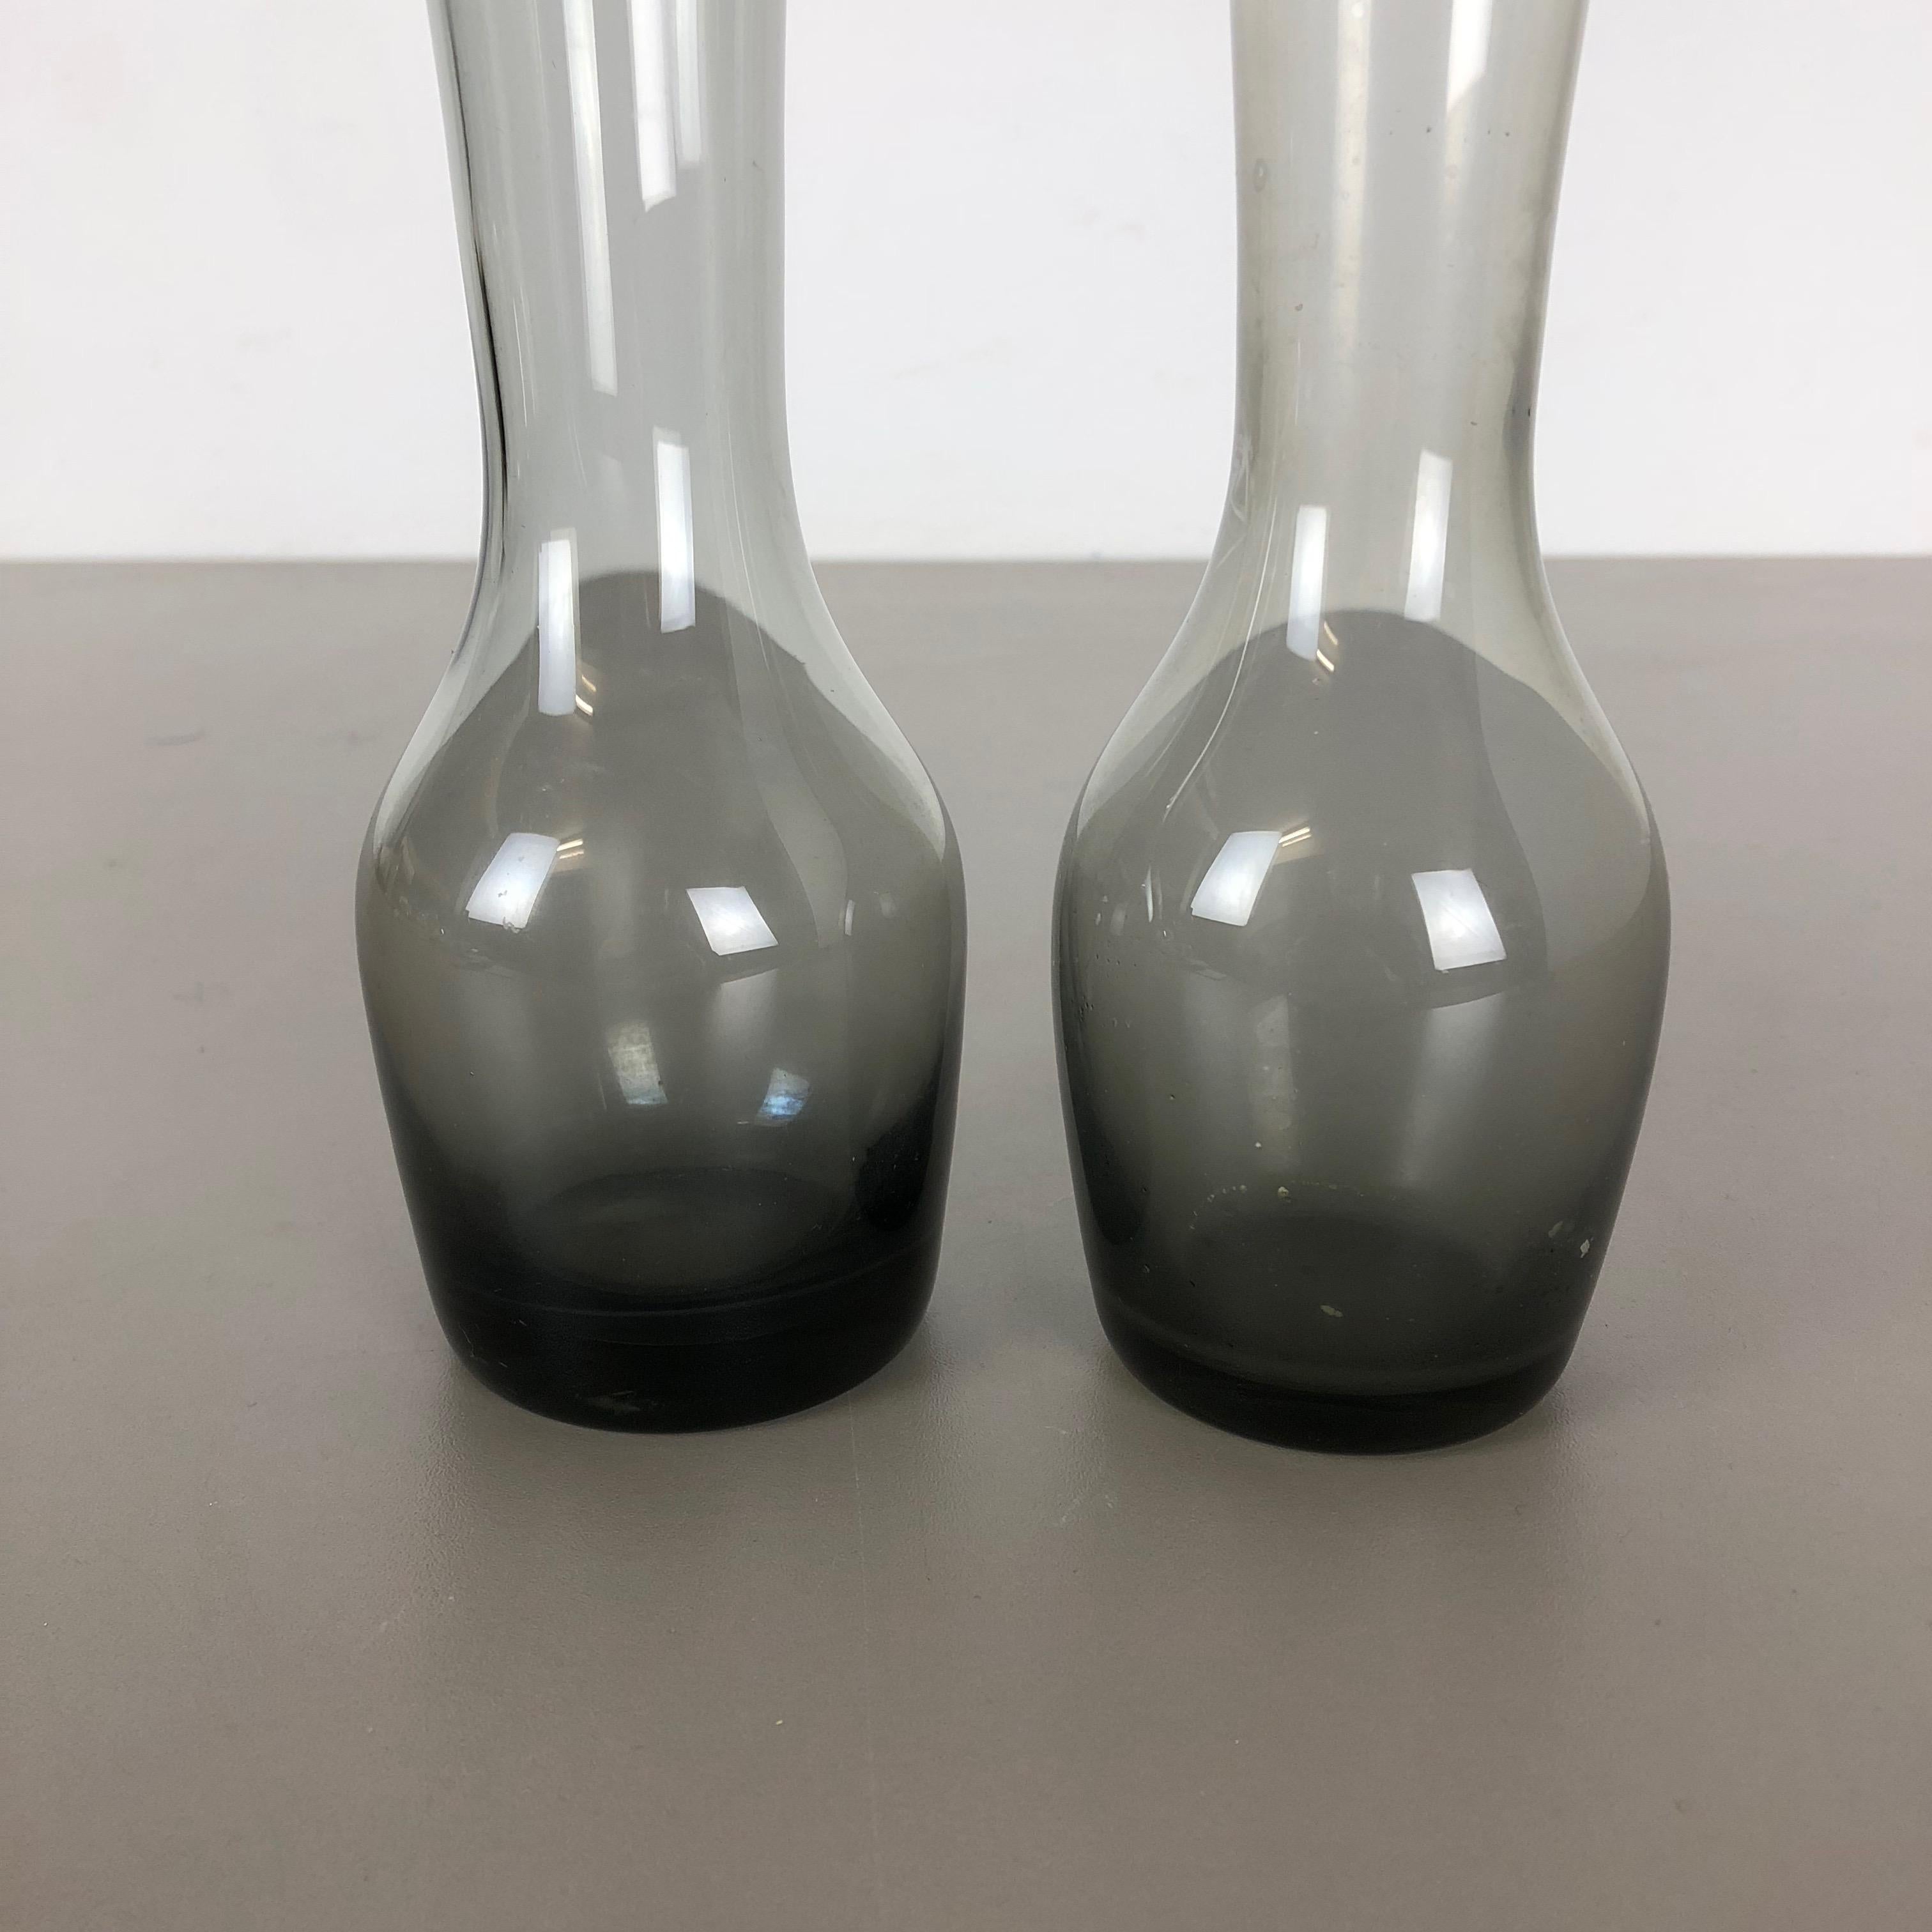 Vintage 1960s Set of 2 Turmalin Vases by Wilhelm Wagenfeld for WMF, Germany For Sale 11